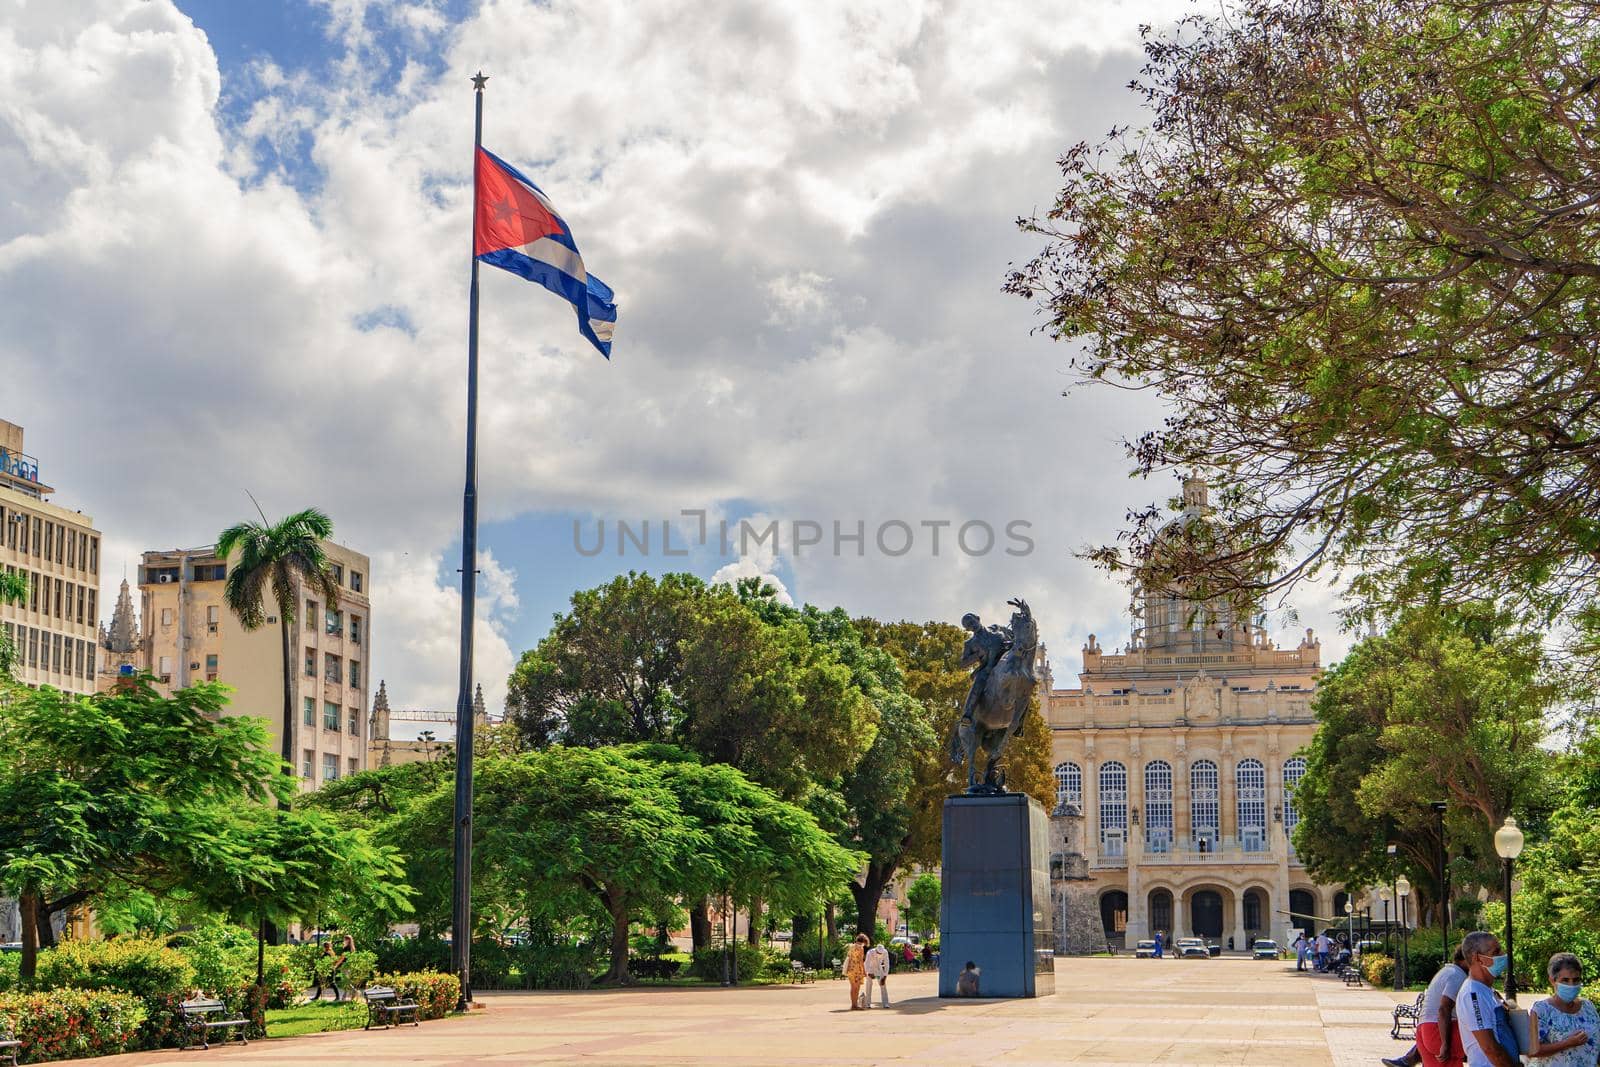 Havana Cuba. November 25, 2020: View of the Plaza 13 de Marzo with the Cuban flag waving on a pole and the statue of Jose Marti riding his horse